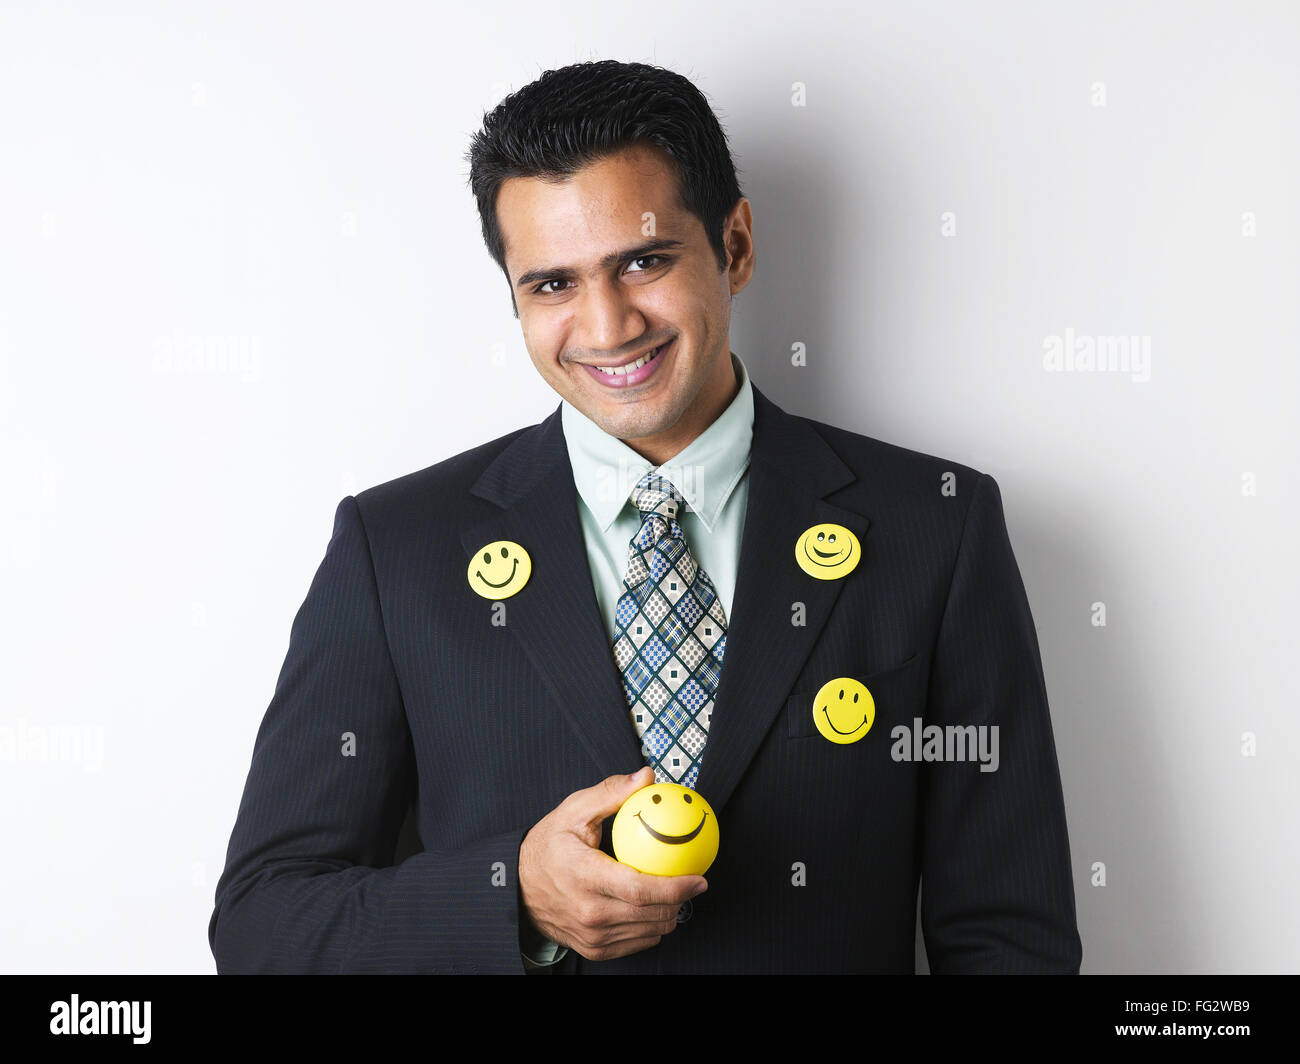 Smiley brooch on coat of executive showing smiley ball MR#779K Stock Photo